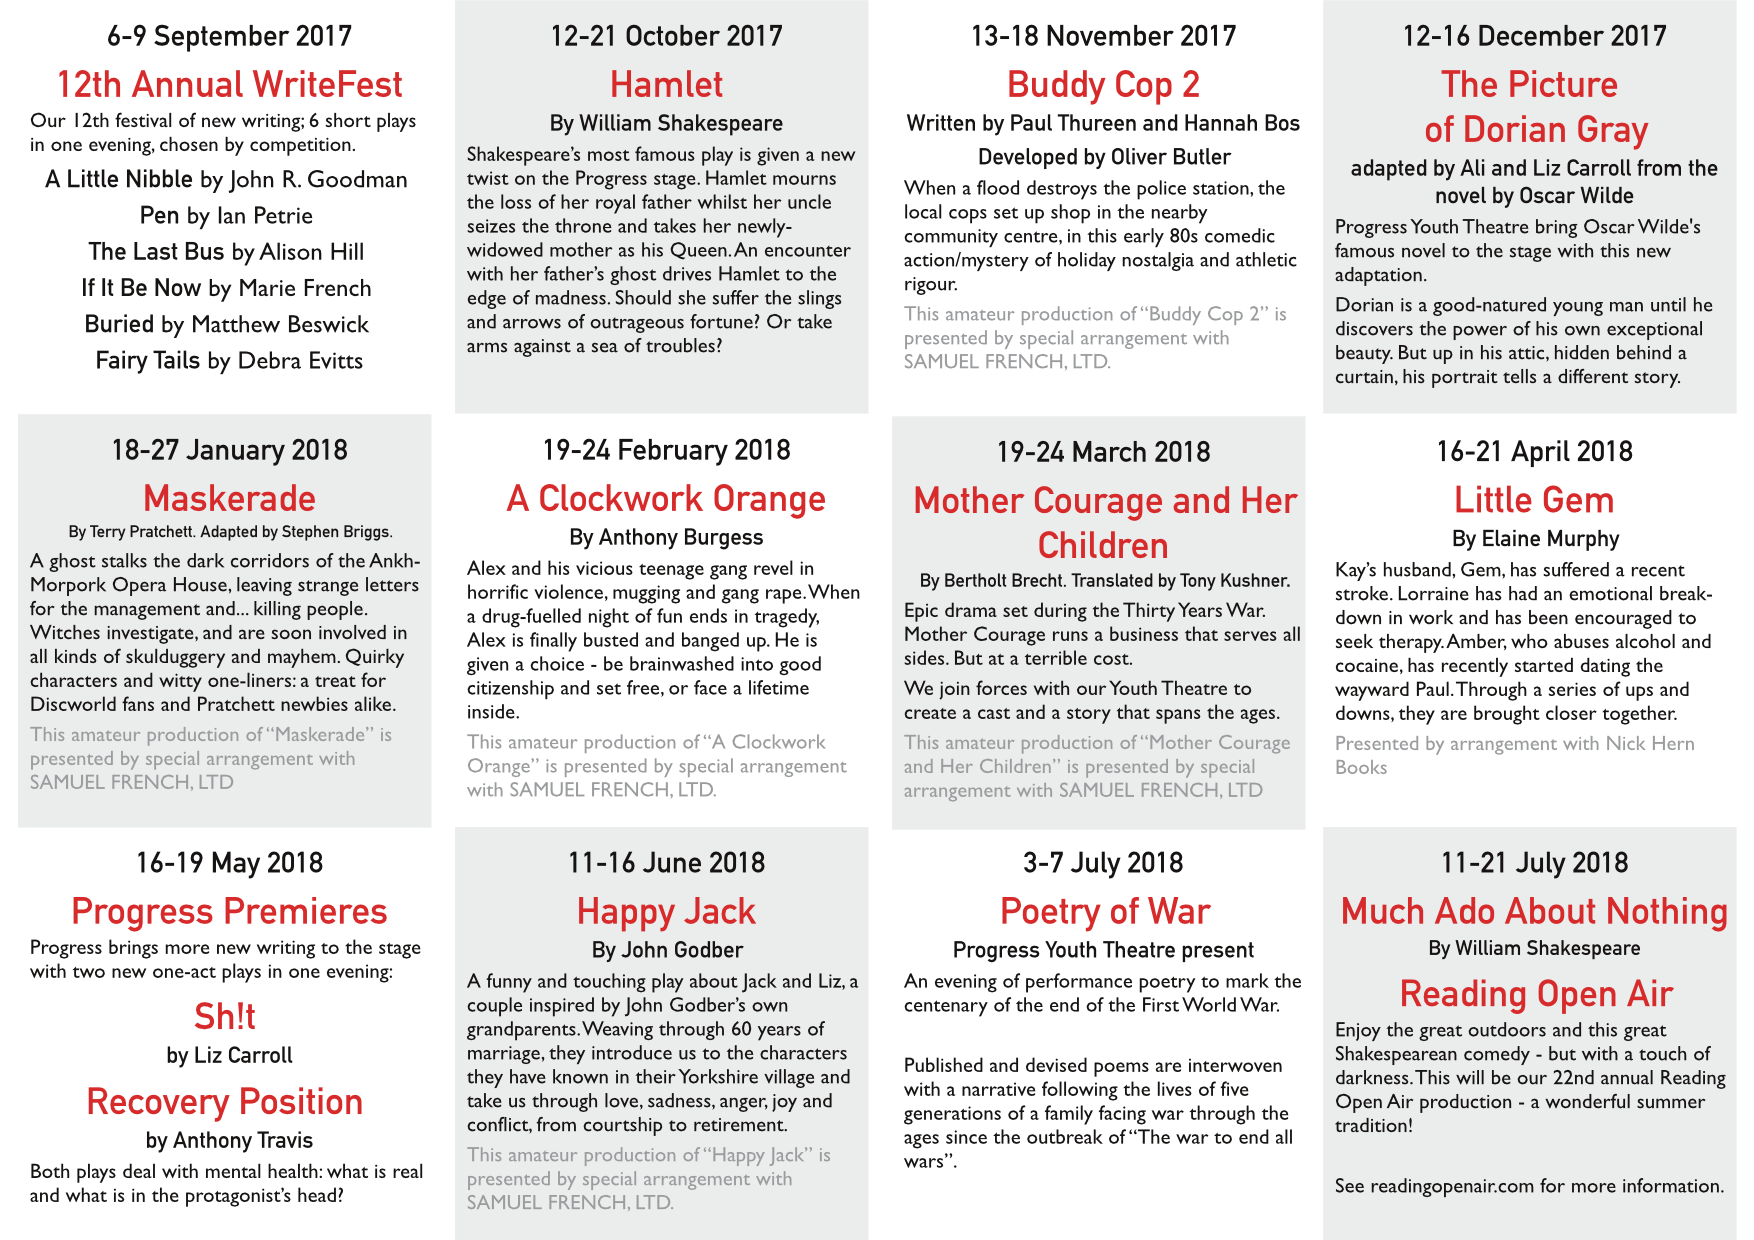 Our 2017-2018 programme of plays